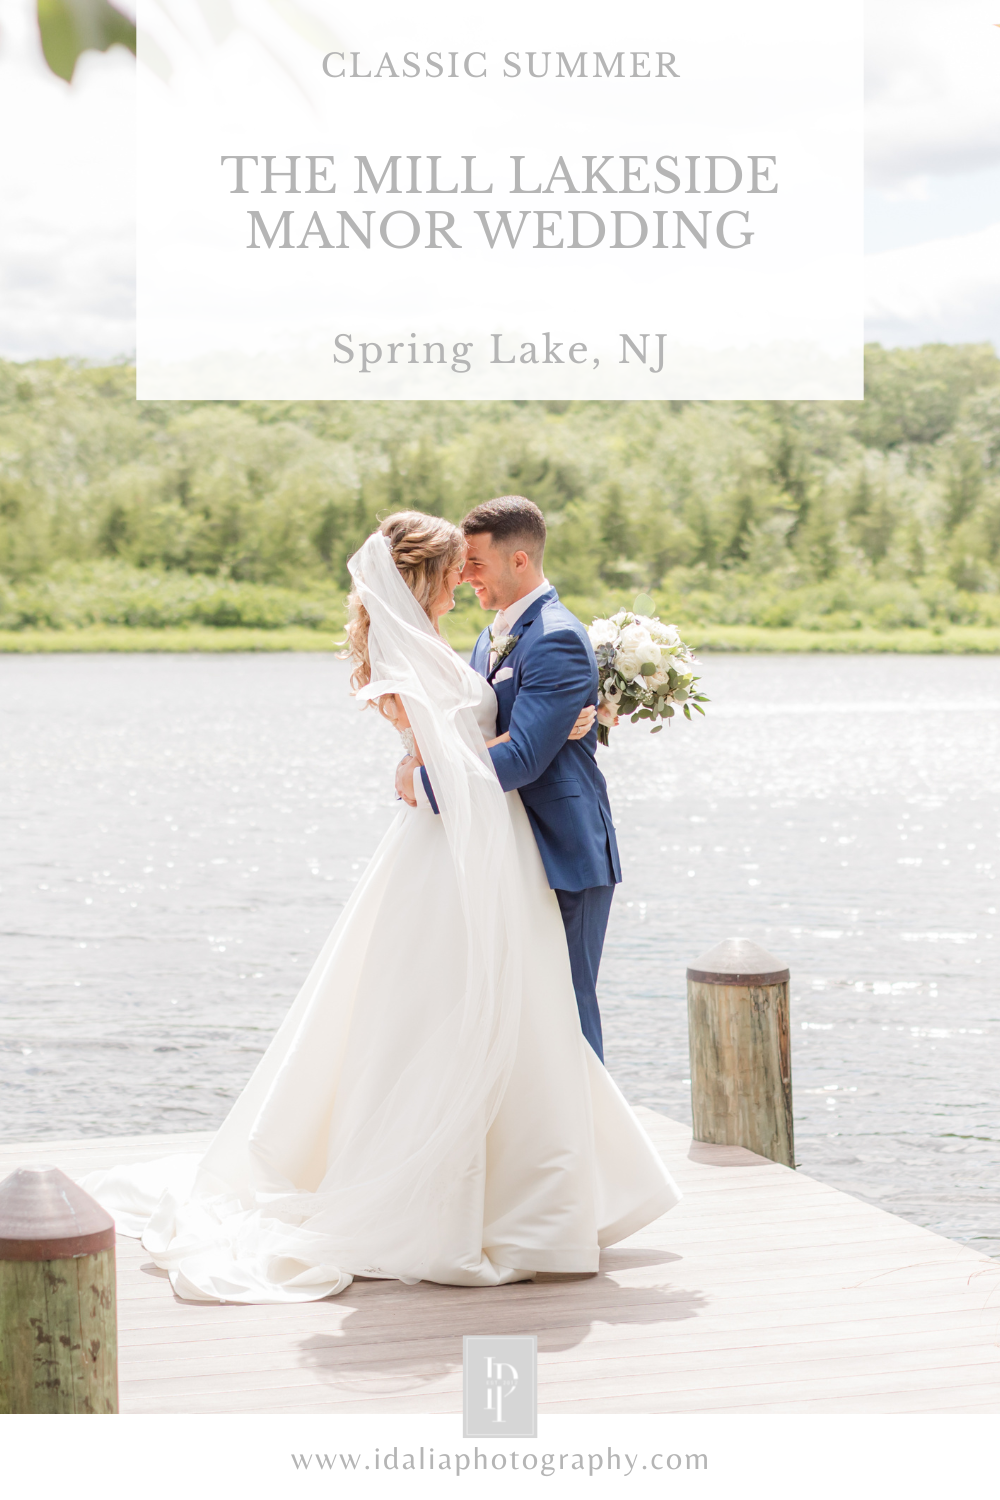 The Mill Lakeside Manor wedding with confetti popper ceremony exit photographed by Idalia Photography